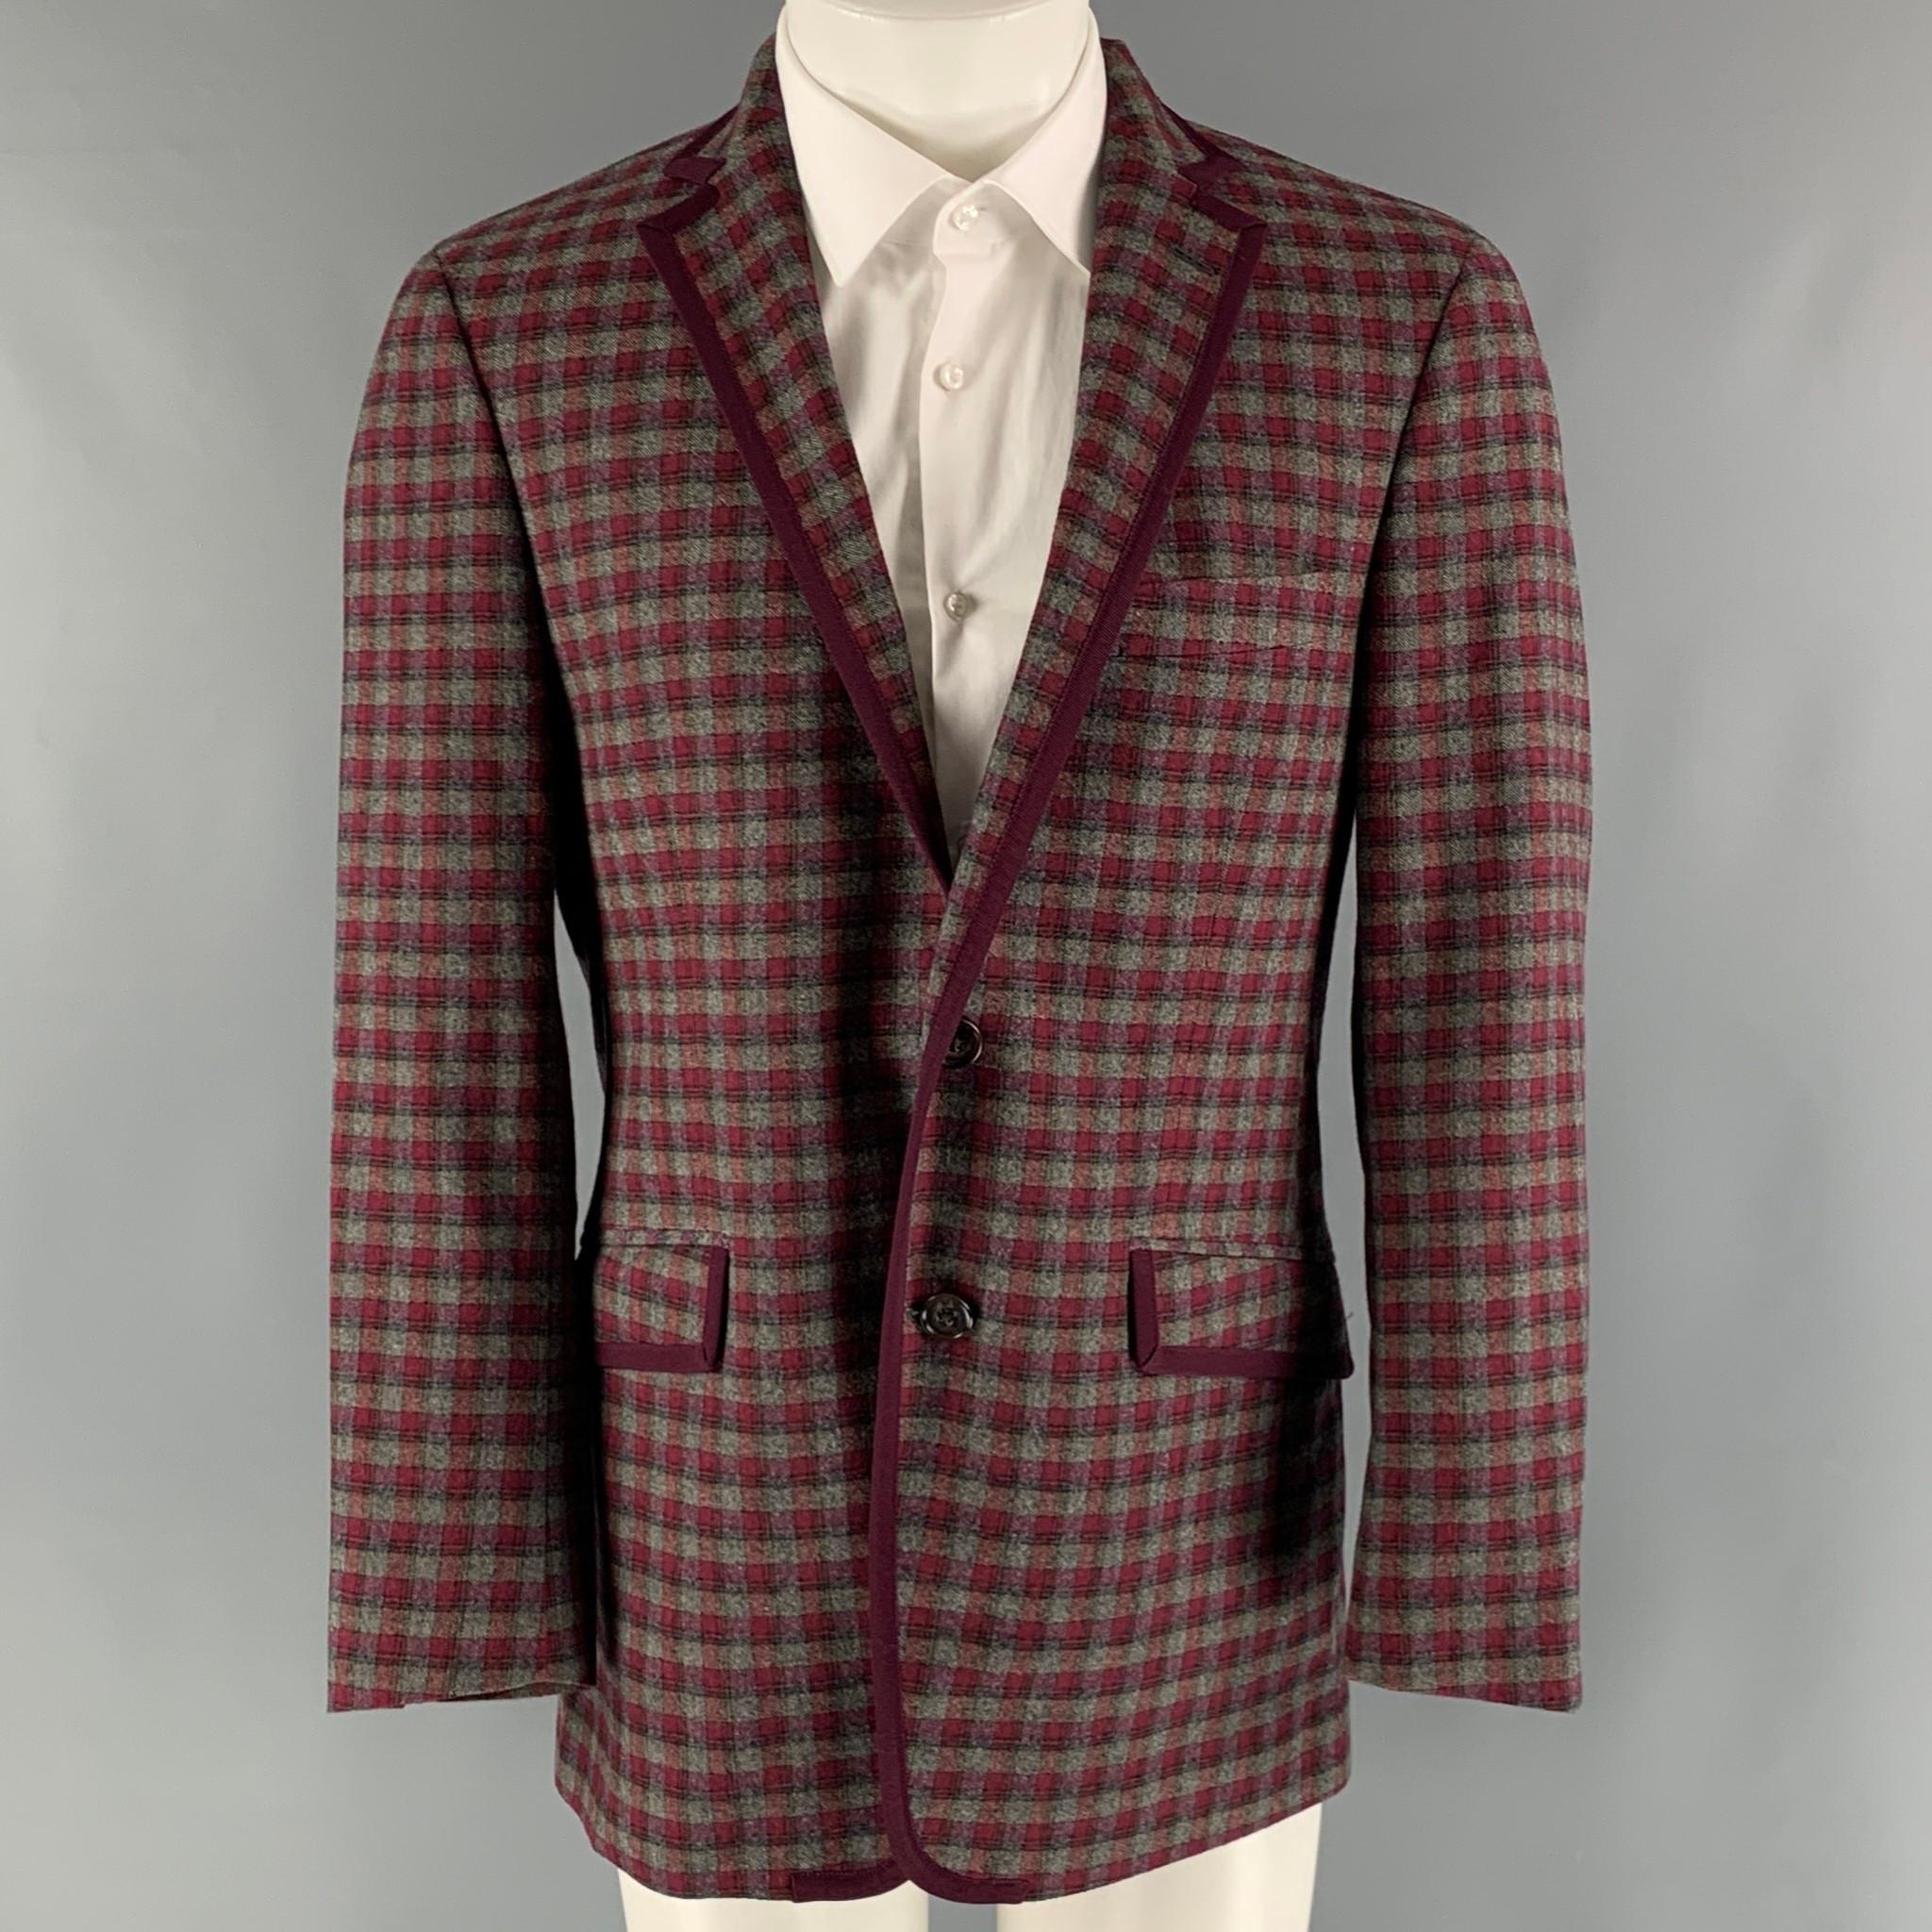 ETRO sport coat comes in a burgundy and grey checkered cotton blend woven material with a full liner featuring a notch lapel, flap pockets, and a two button closure. Made in Italy.

Very Good Pre-Owned Condition. 
Marked: IT